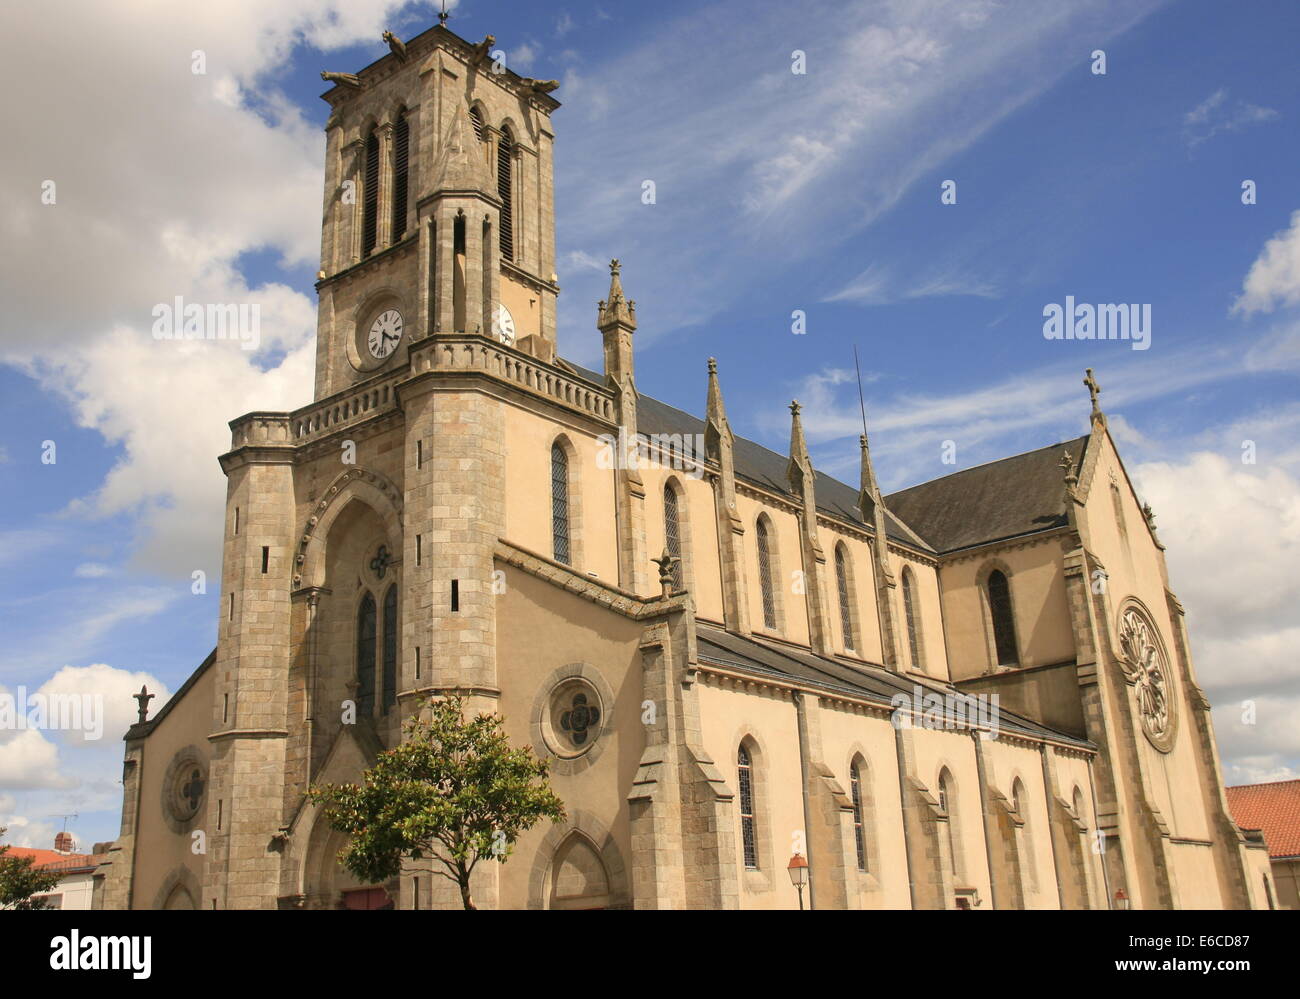 Chiesa in Montaigu Town, vicino a Cholet, Les Herbiers e Nantes in Francia Foto Stock